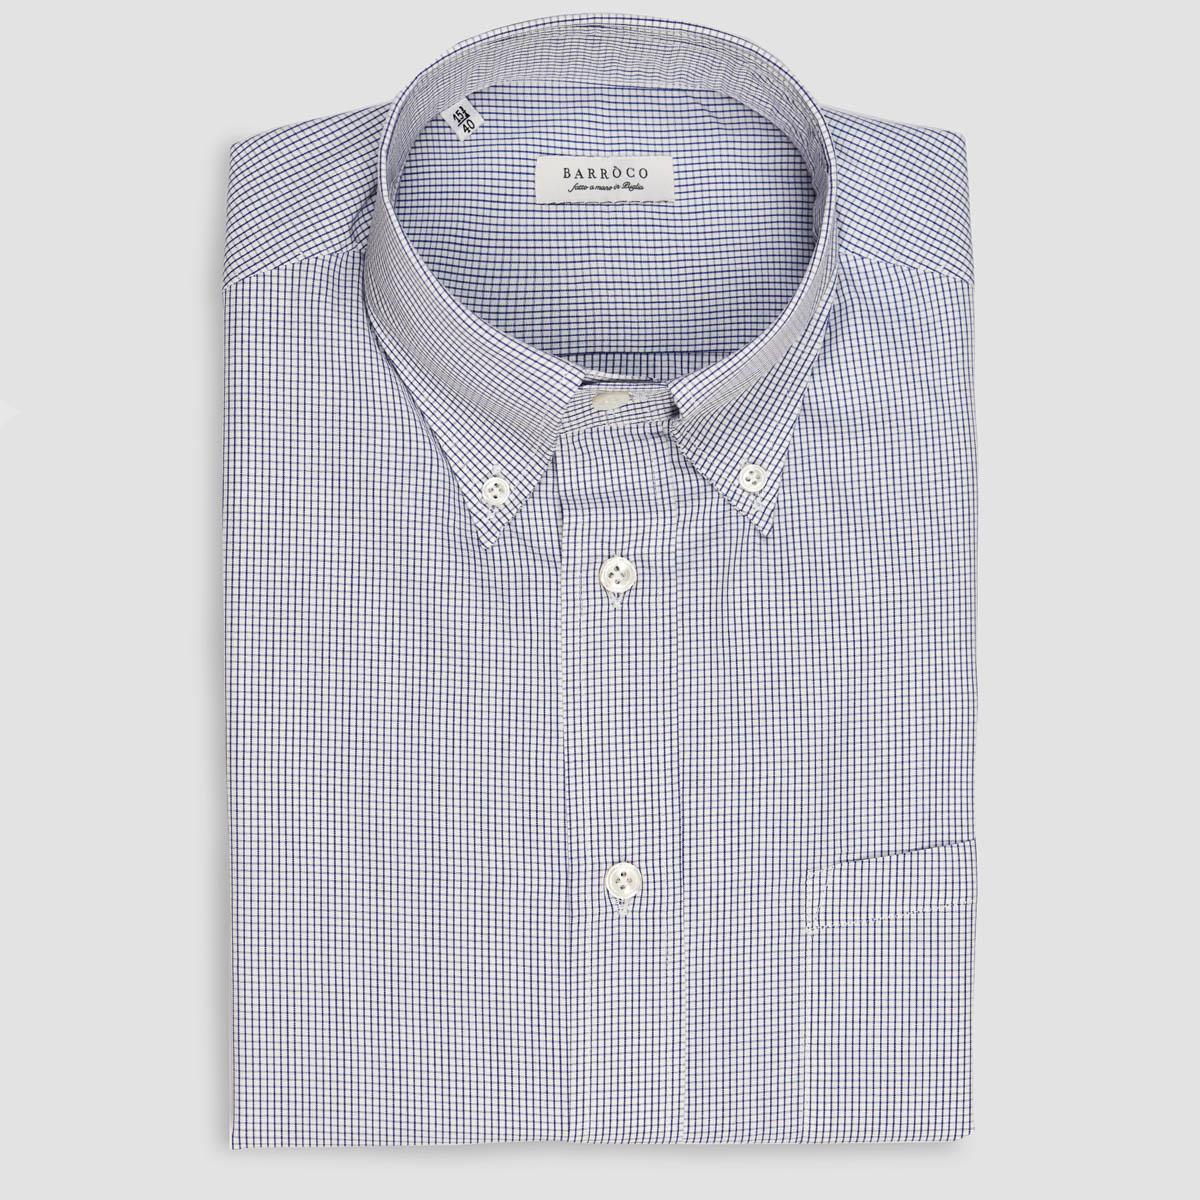 Blue White Micro Check Double Twisted Popeline Shirt